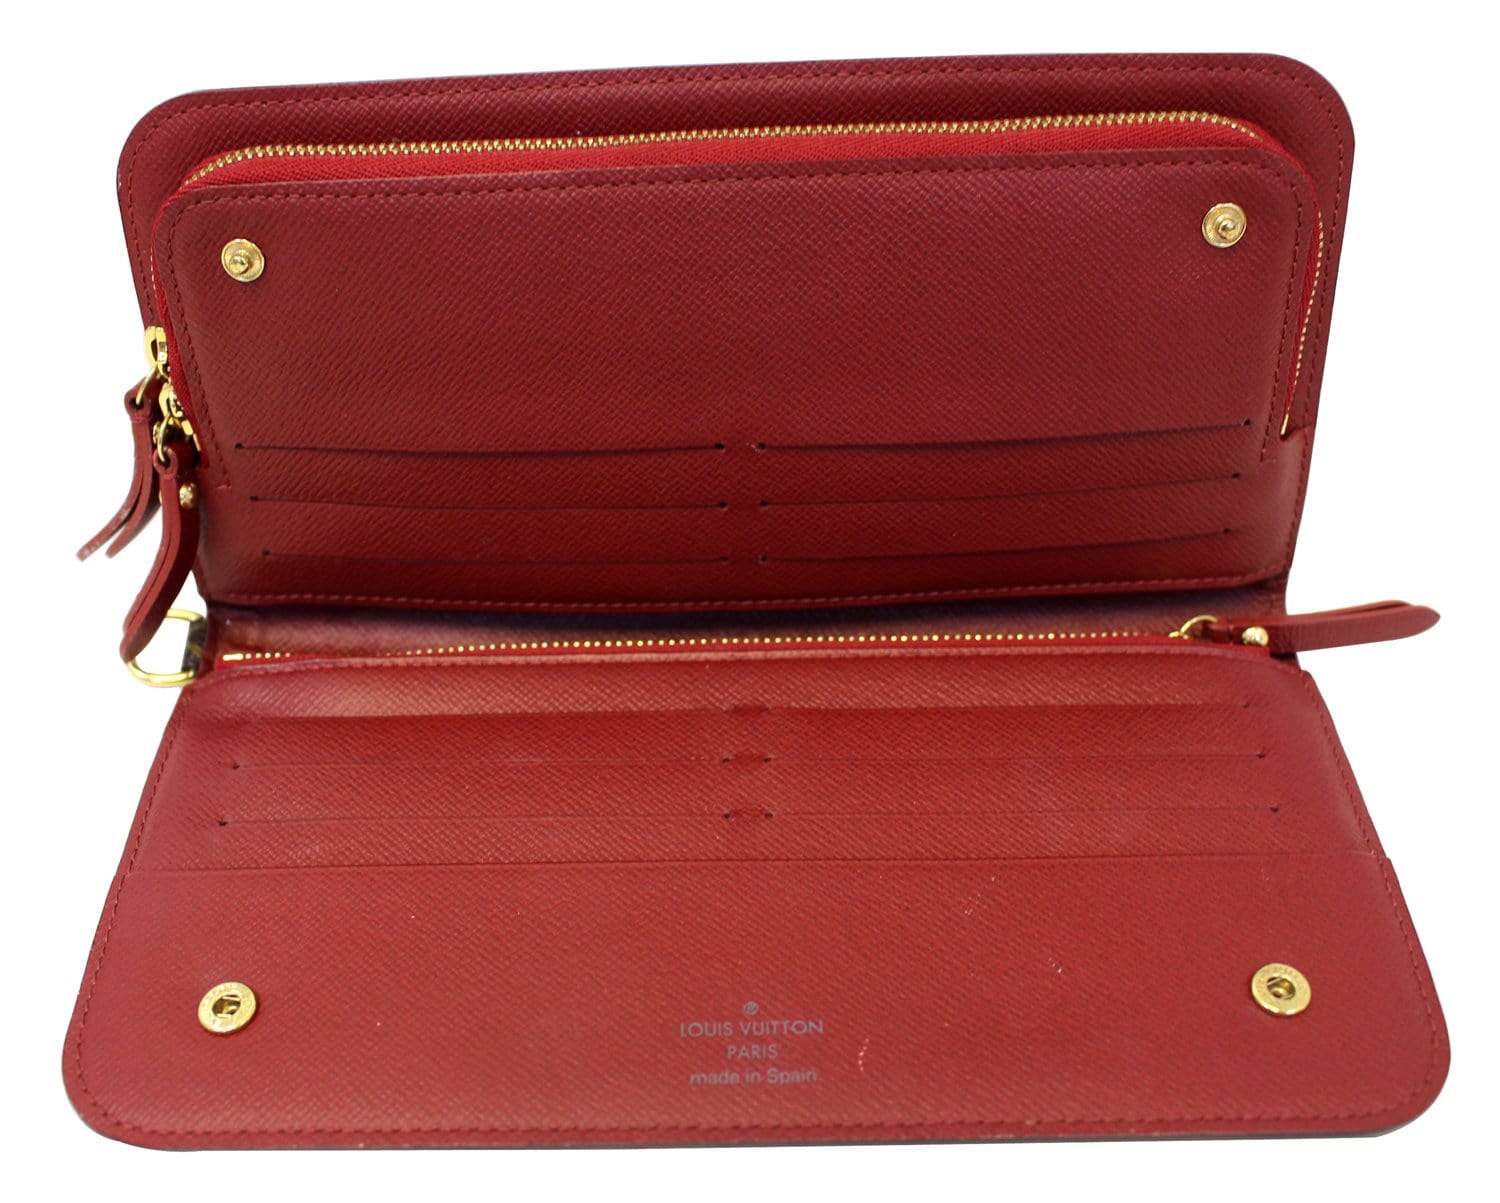 Brand new authentic Louis Vuitton Wallet/SLG Rare Red/Monogram